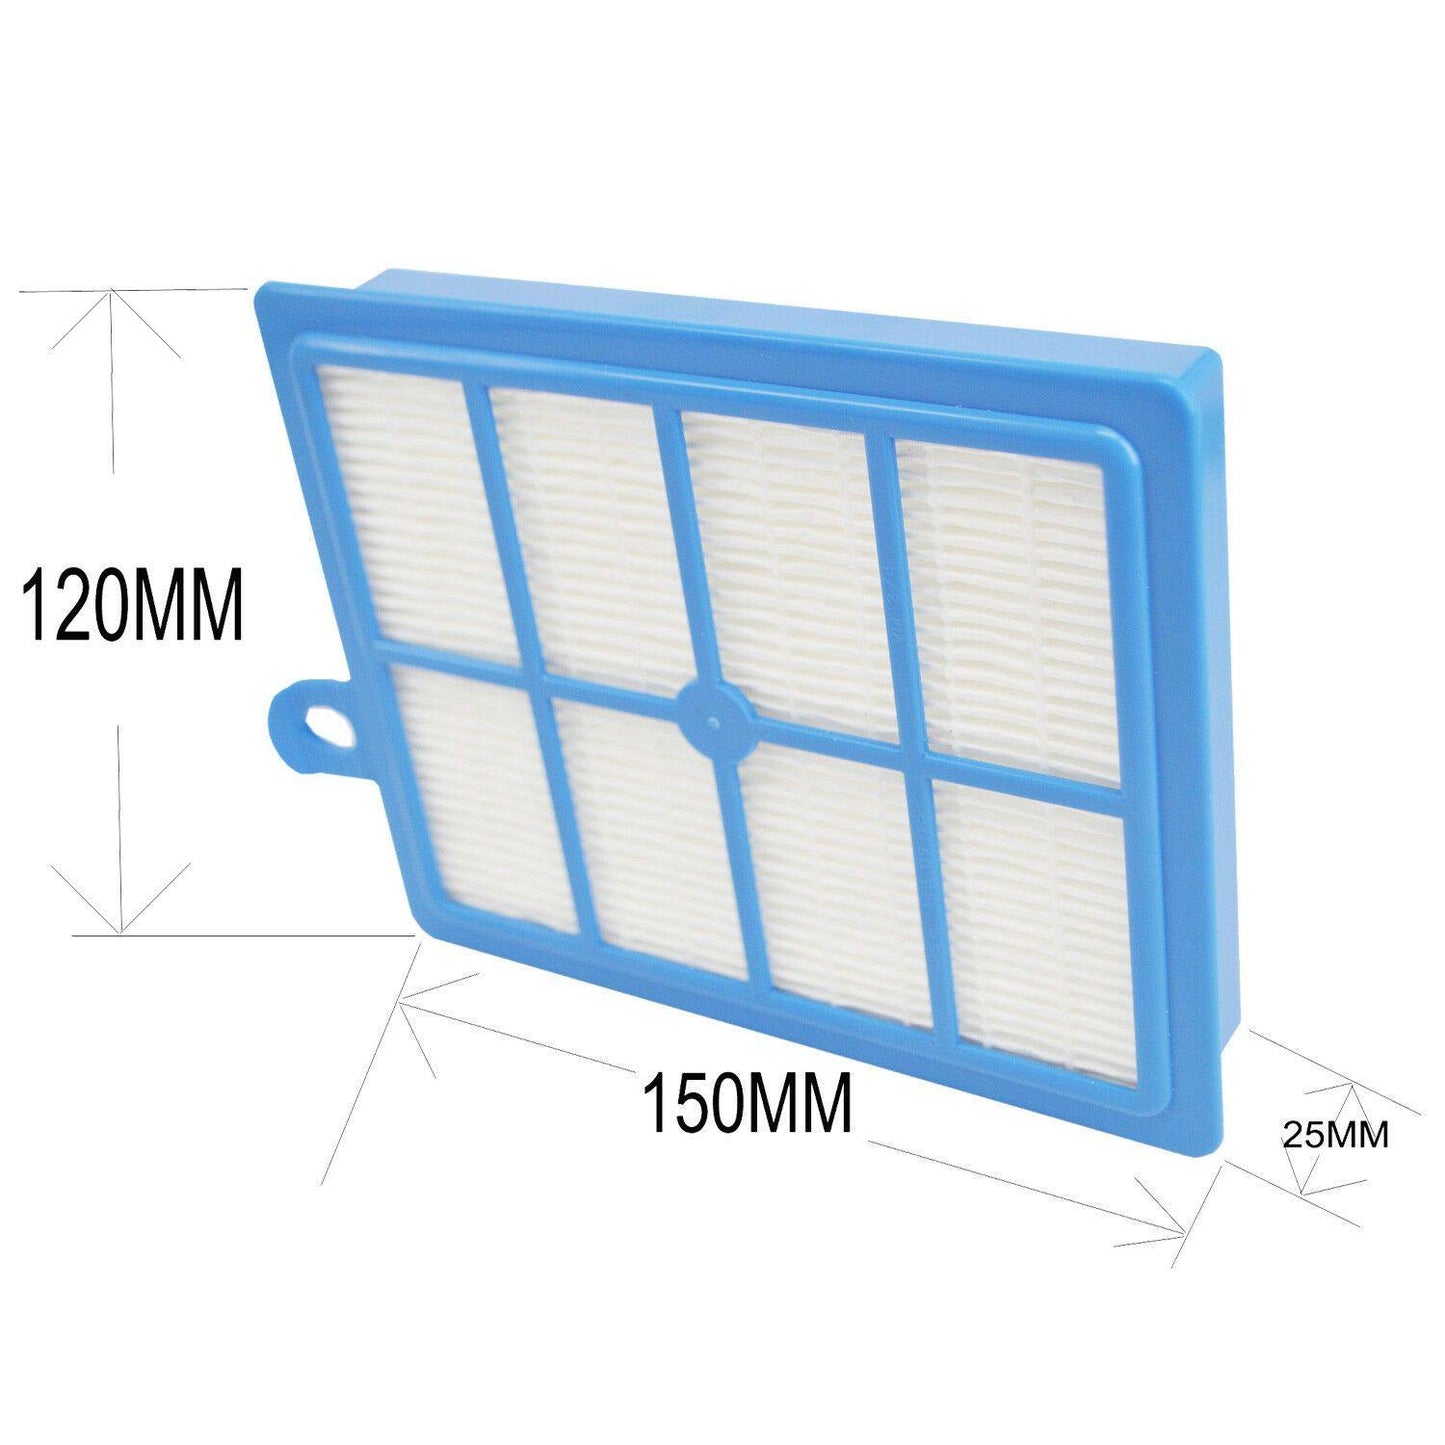 HEPA Filter Starter Kit For Electolux Super Cyclone XL ZCX6200 ZCX6499 Sparesbarn